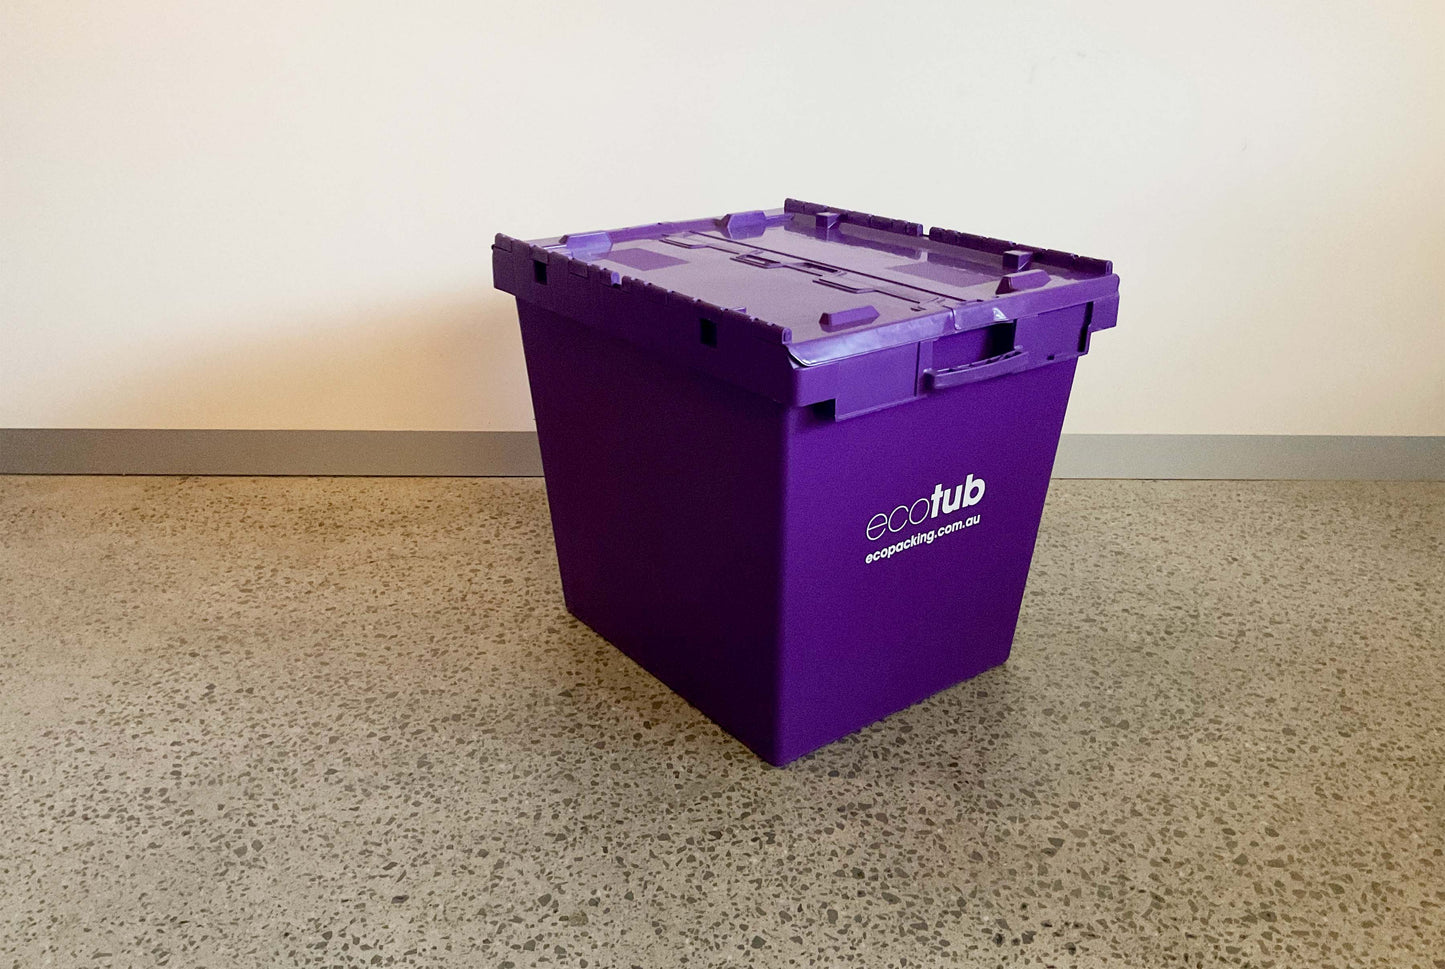 Hire our packing boxes online in the Melbourne area. The large eco tub shown at a slight angle, shows the word eco tub and the eco packing website address.